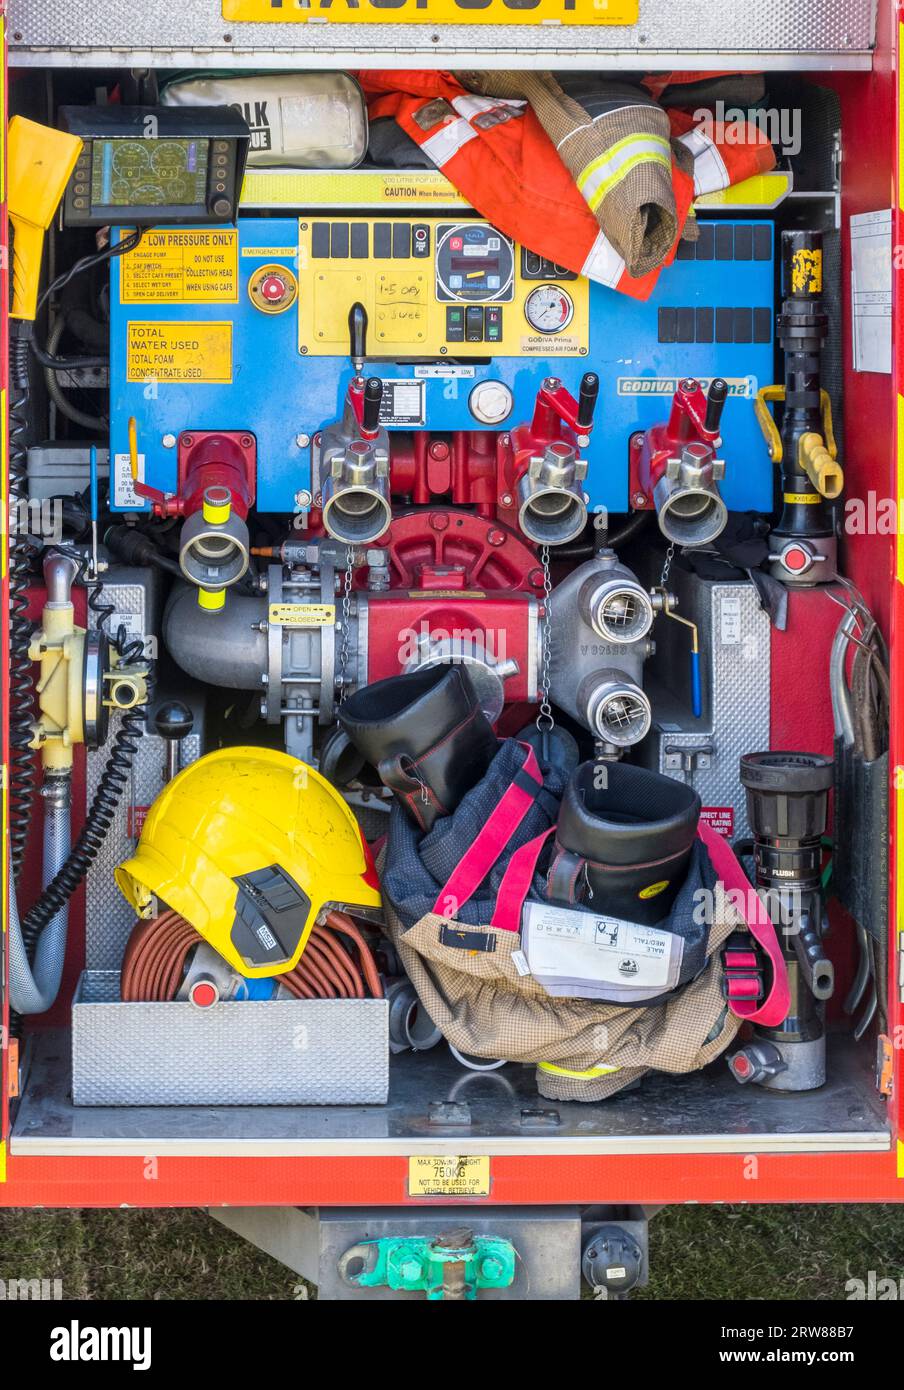 Fire fighting equipment at the rear of a fire appliance / tender. Stock Photo